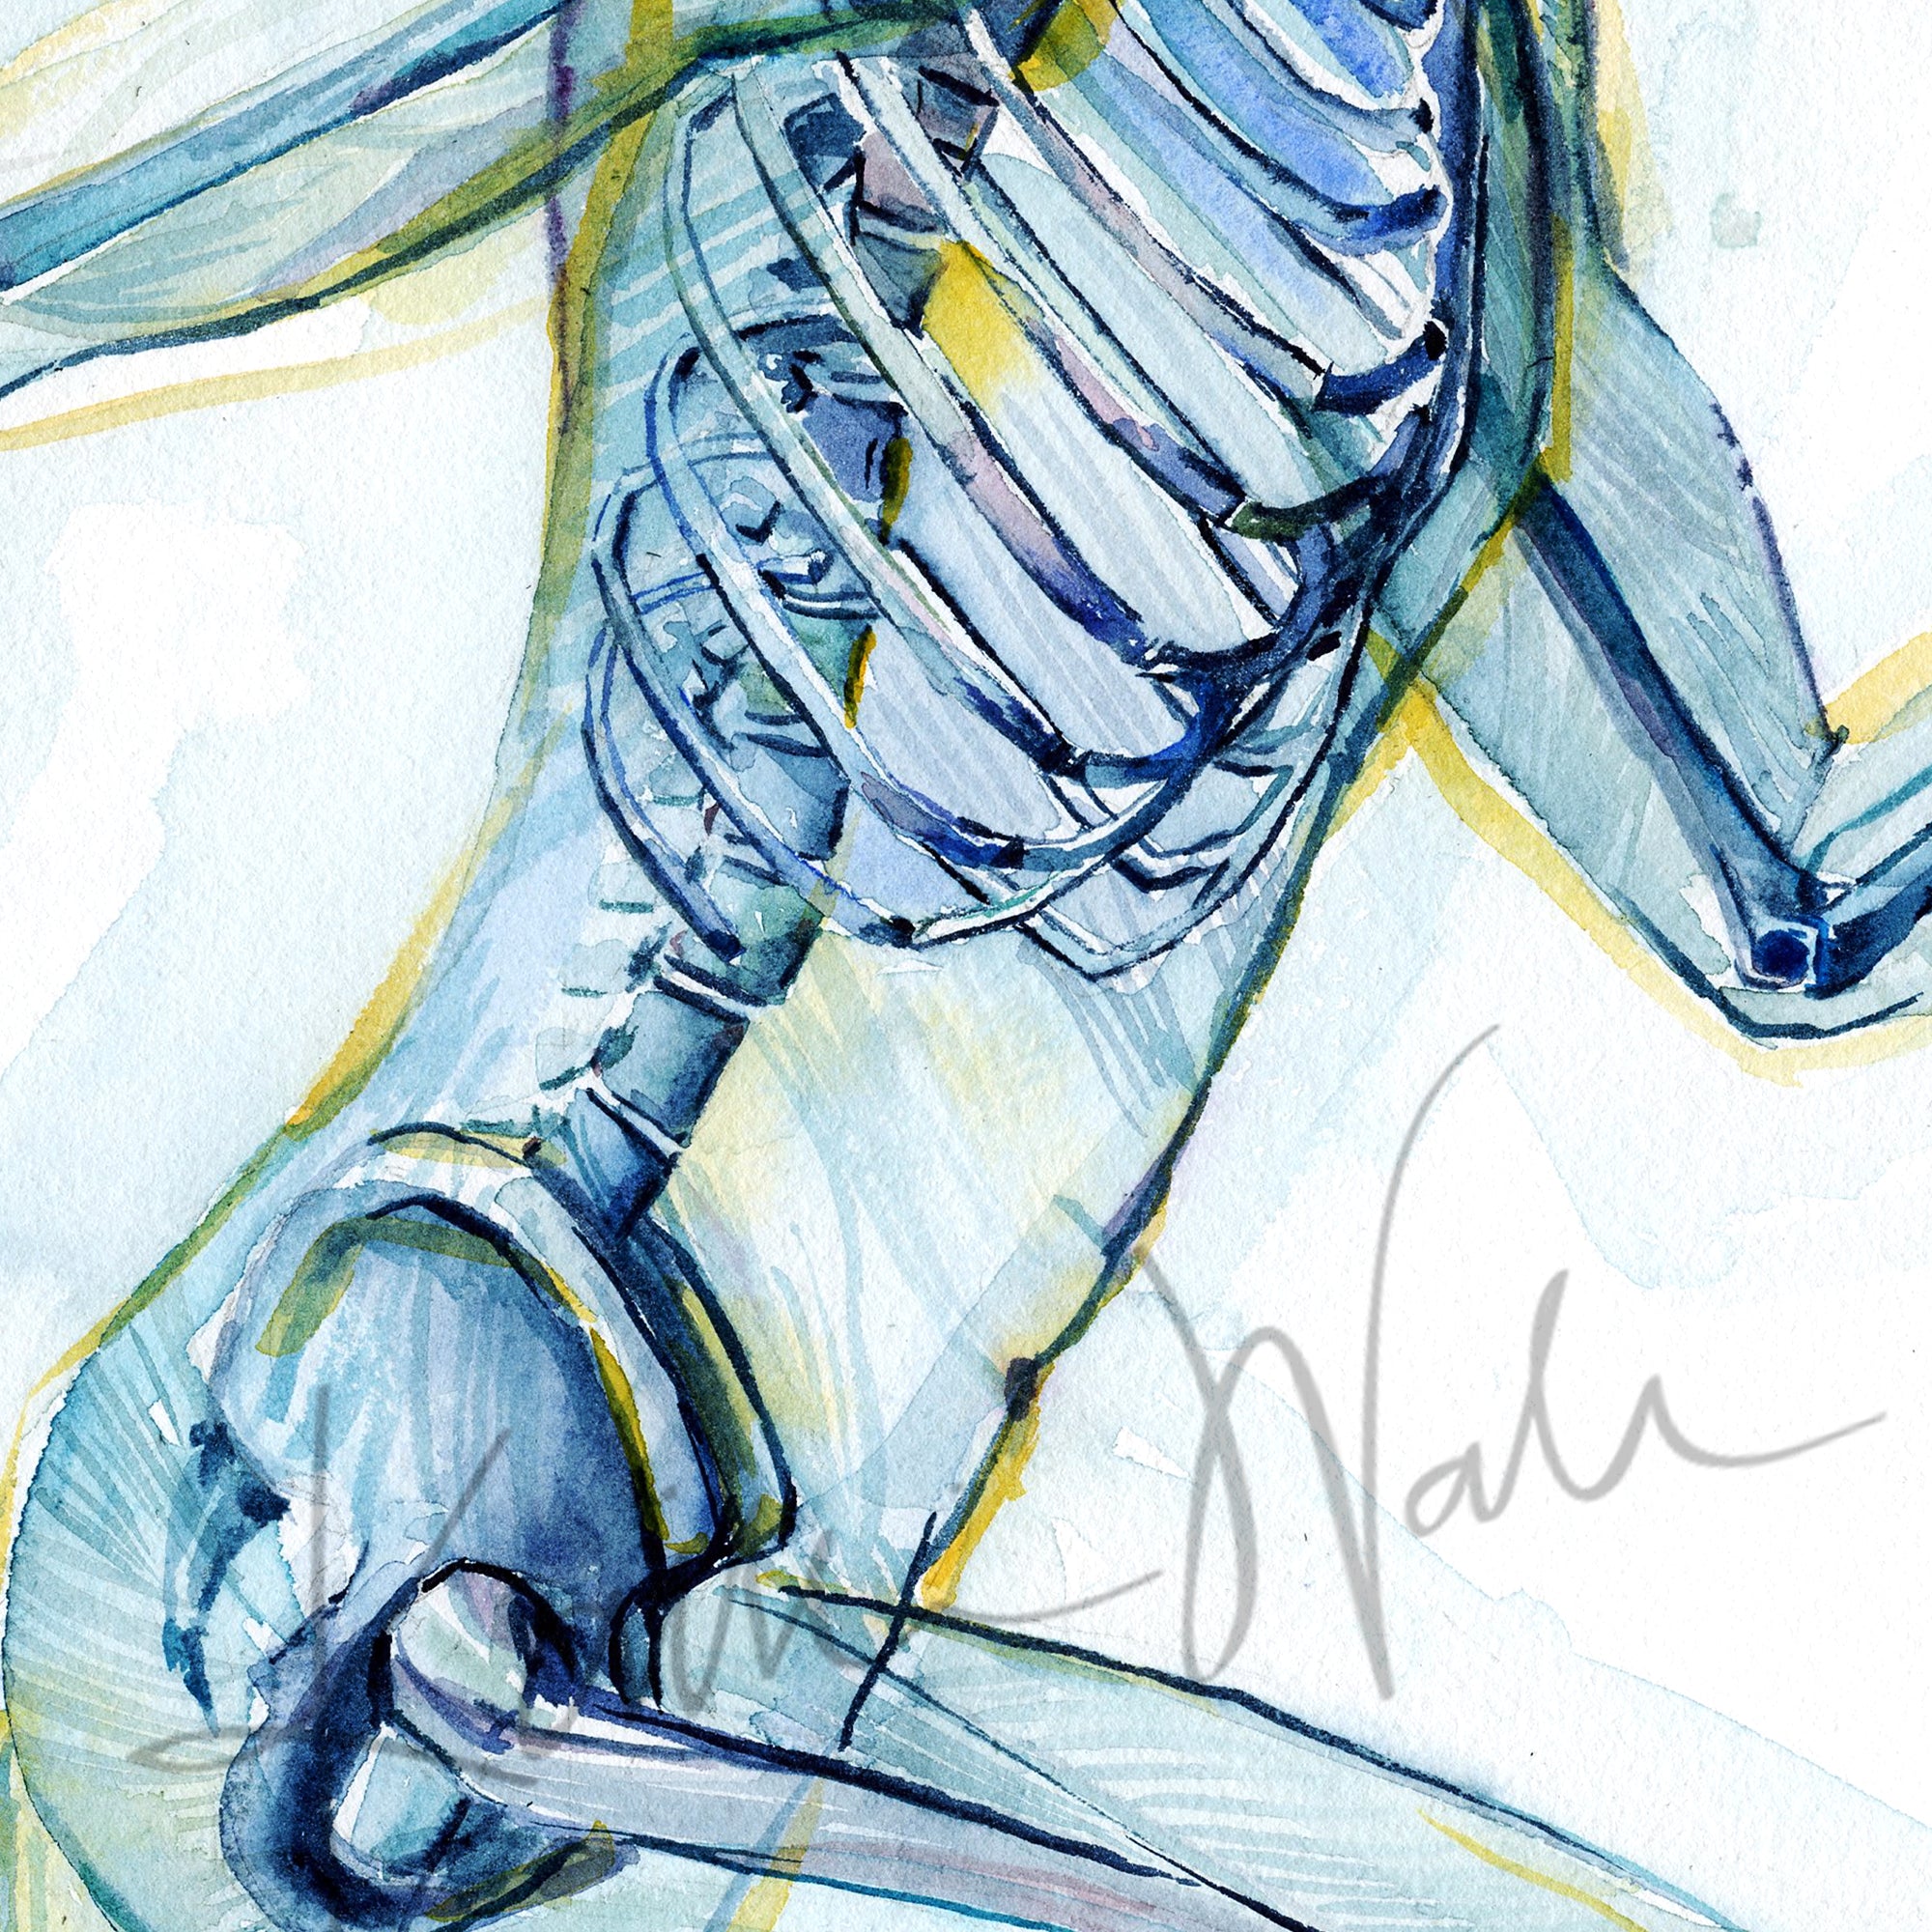 Zoomed in view of a watercolor painting of a runner, showing the skeletal structure beneath.